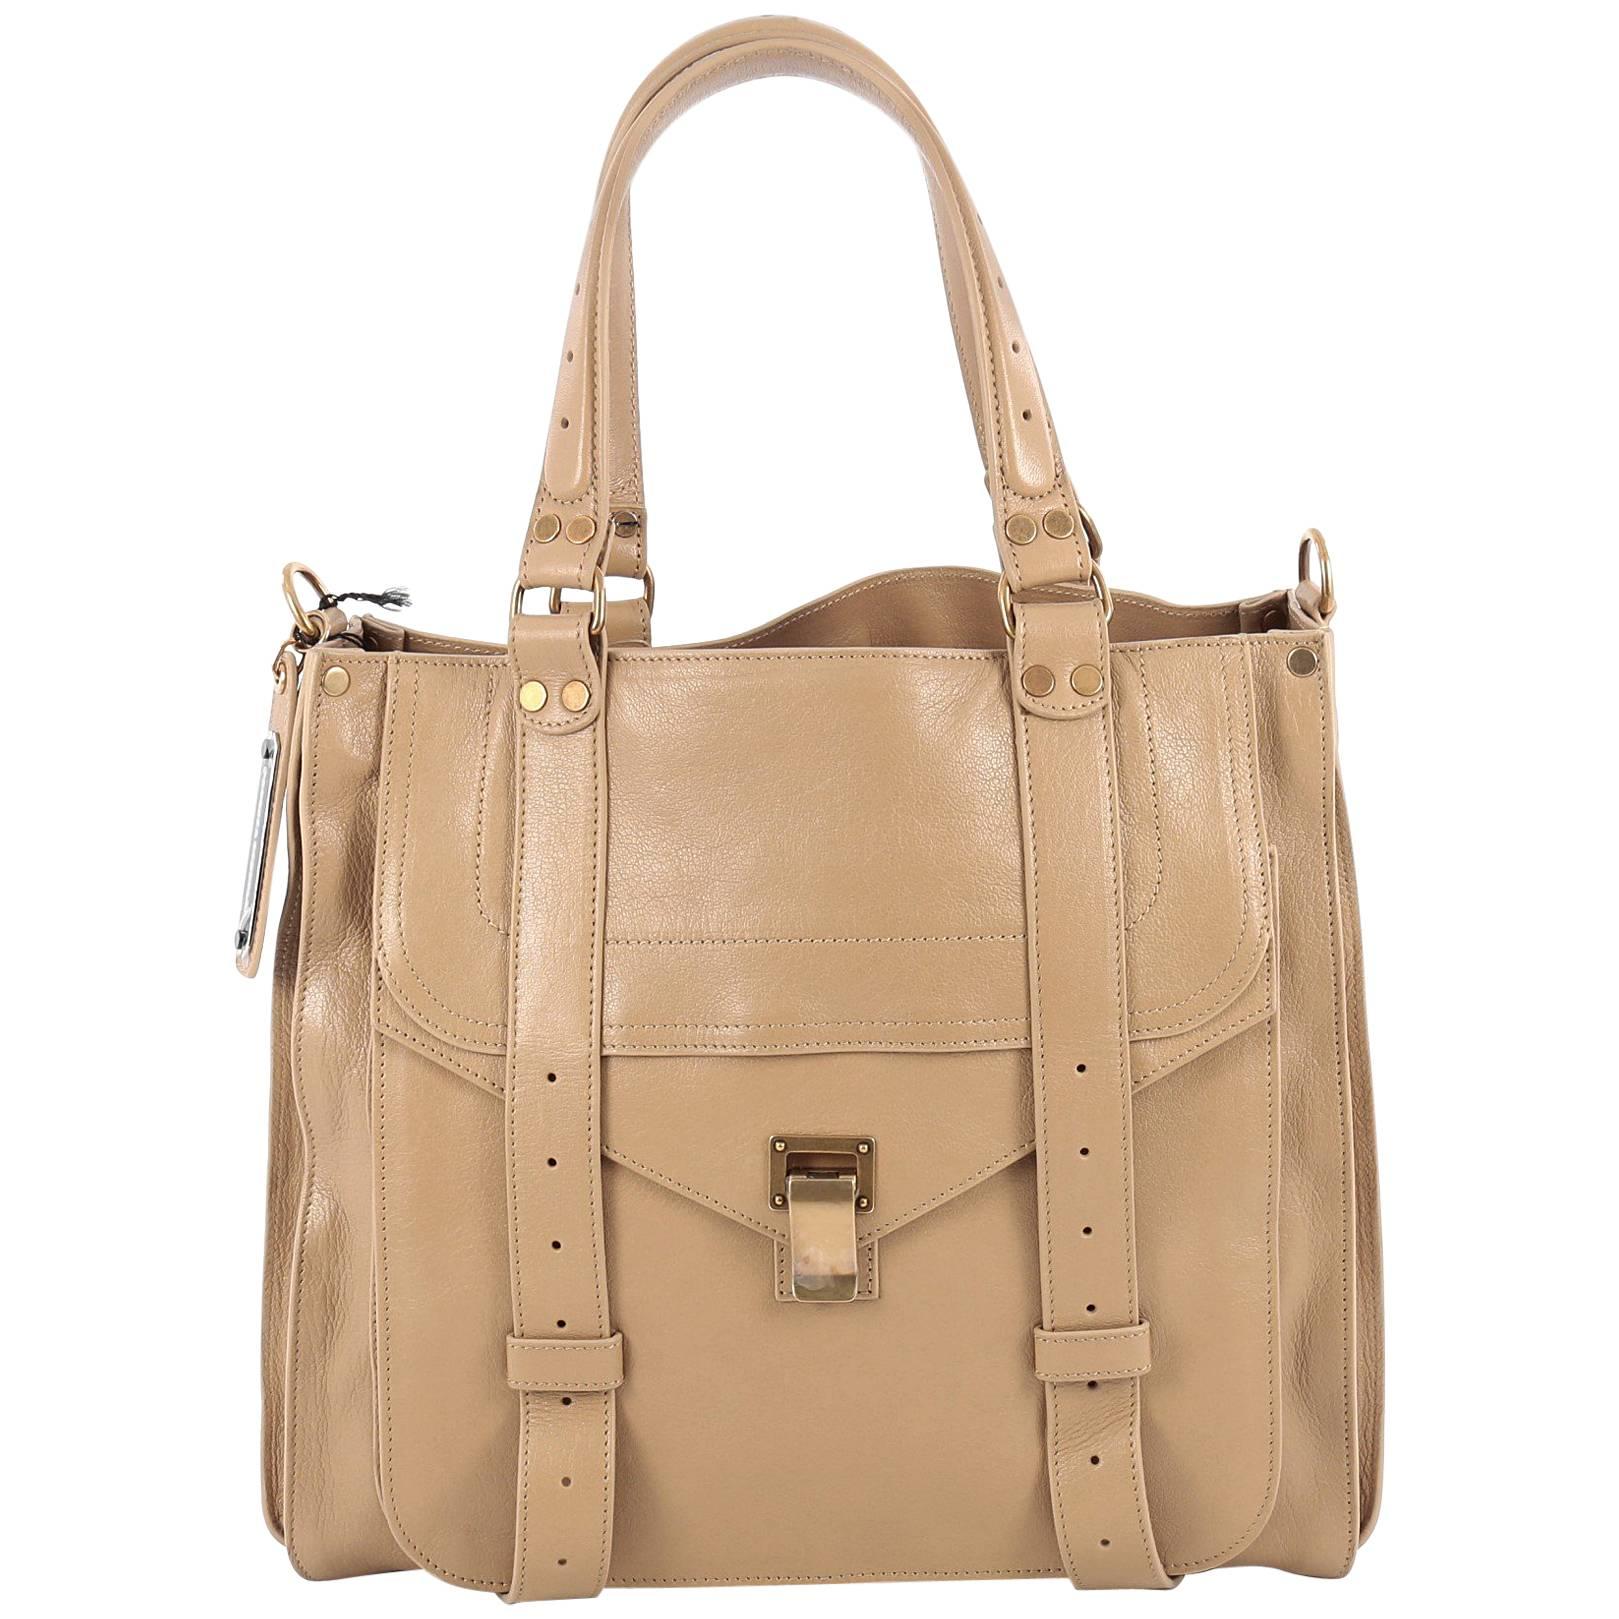 Proenza Schouler PS1 Convertible Tote Leather